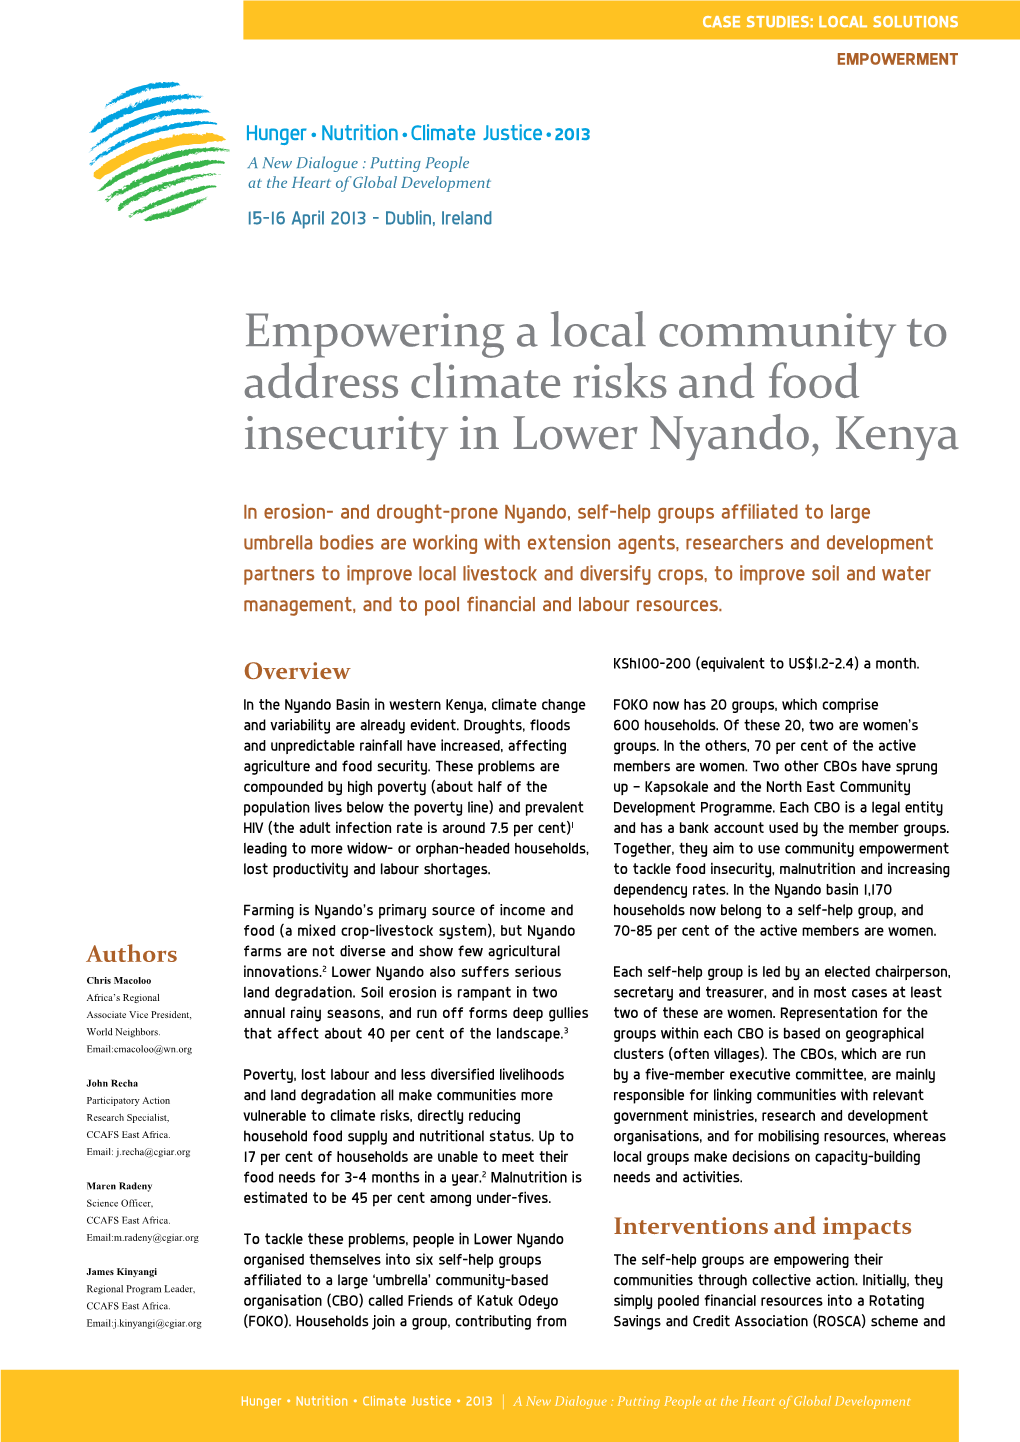 Empowering a Local Community to Address Climate Risks and Food Insecurity in Lower Nyando, Kenya